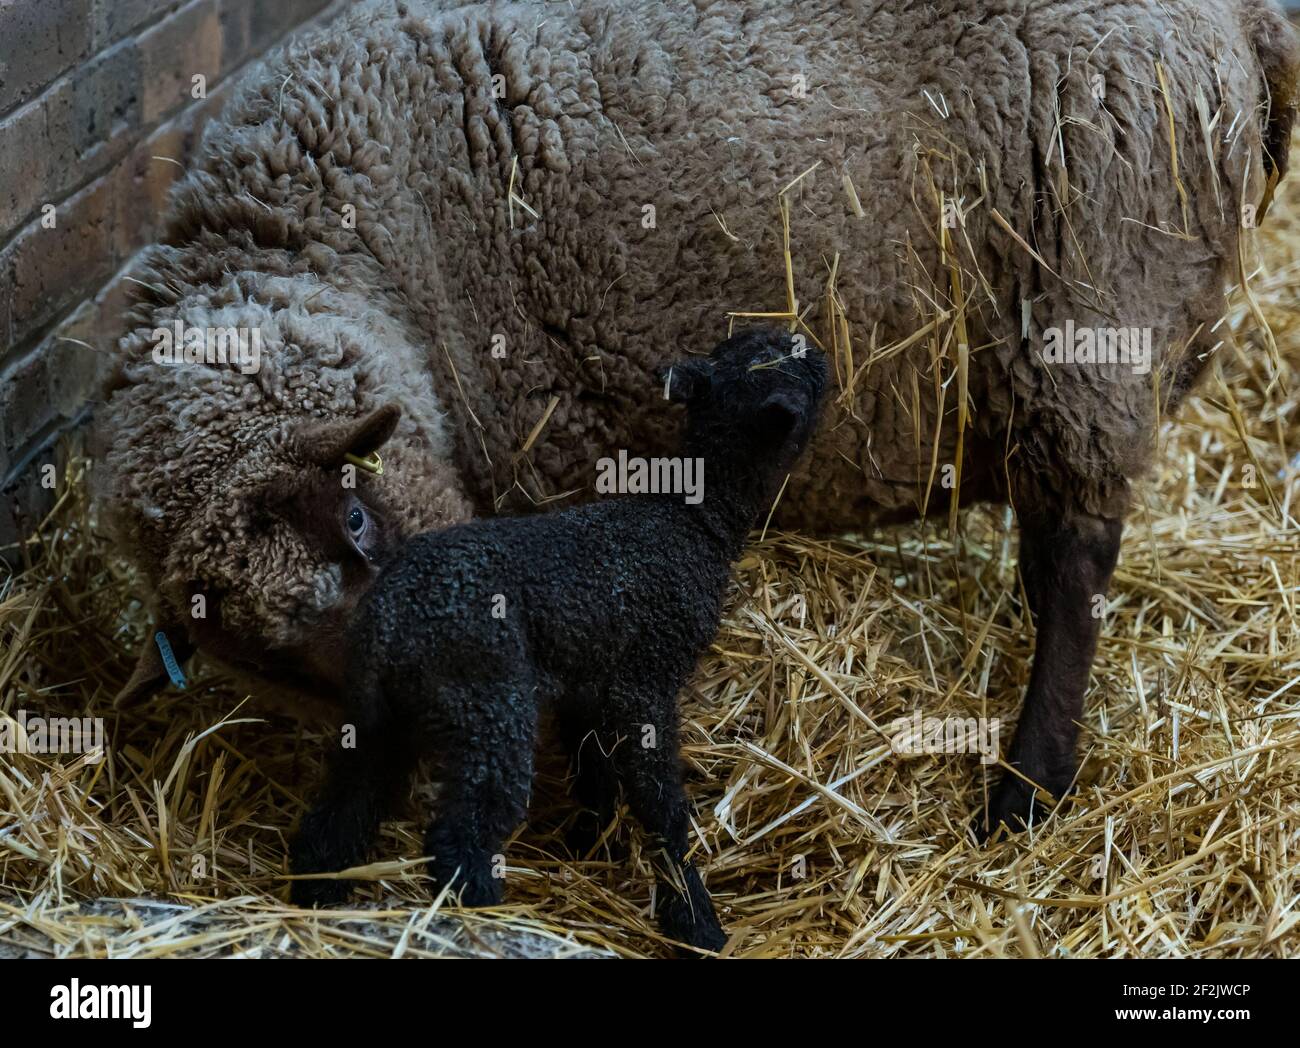 Newborn Shetland sheep lamb being licked clean by mother sheep in barn, East Lothian, Scotland, UK Stock Photo